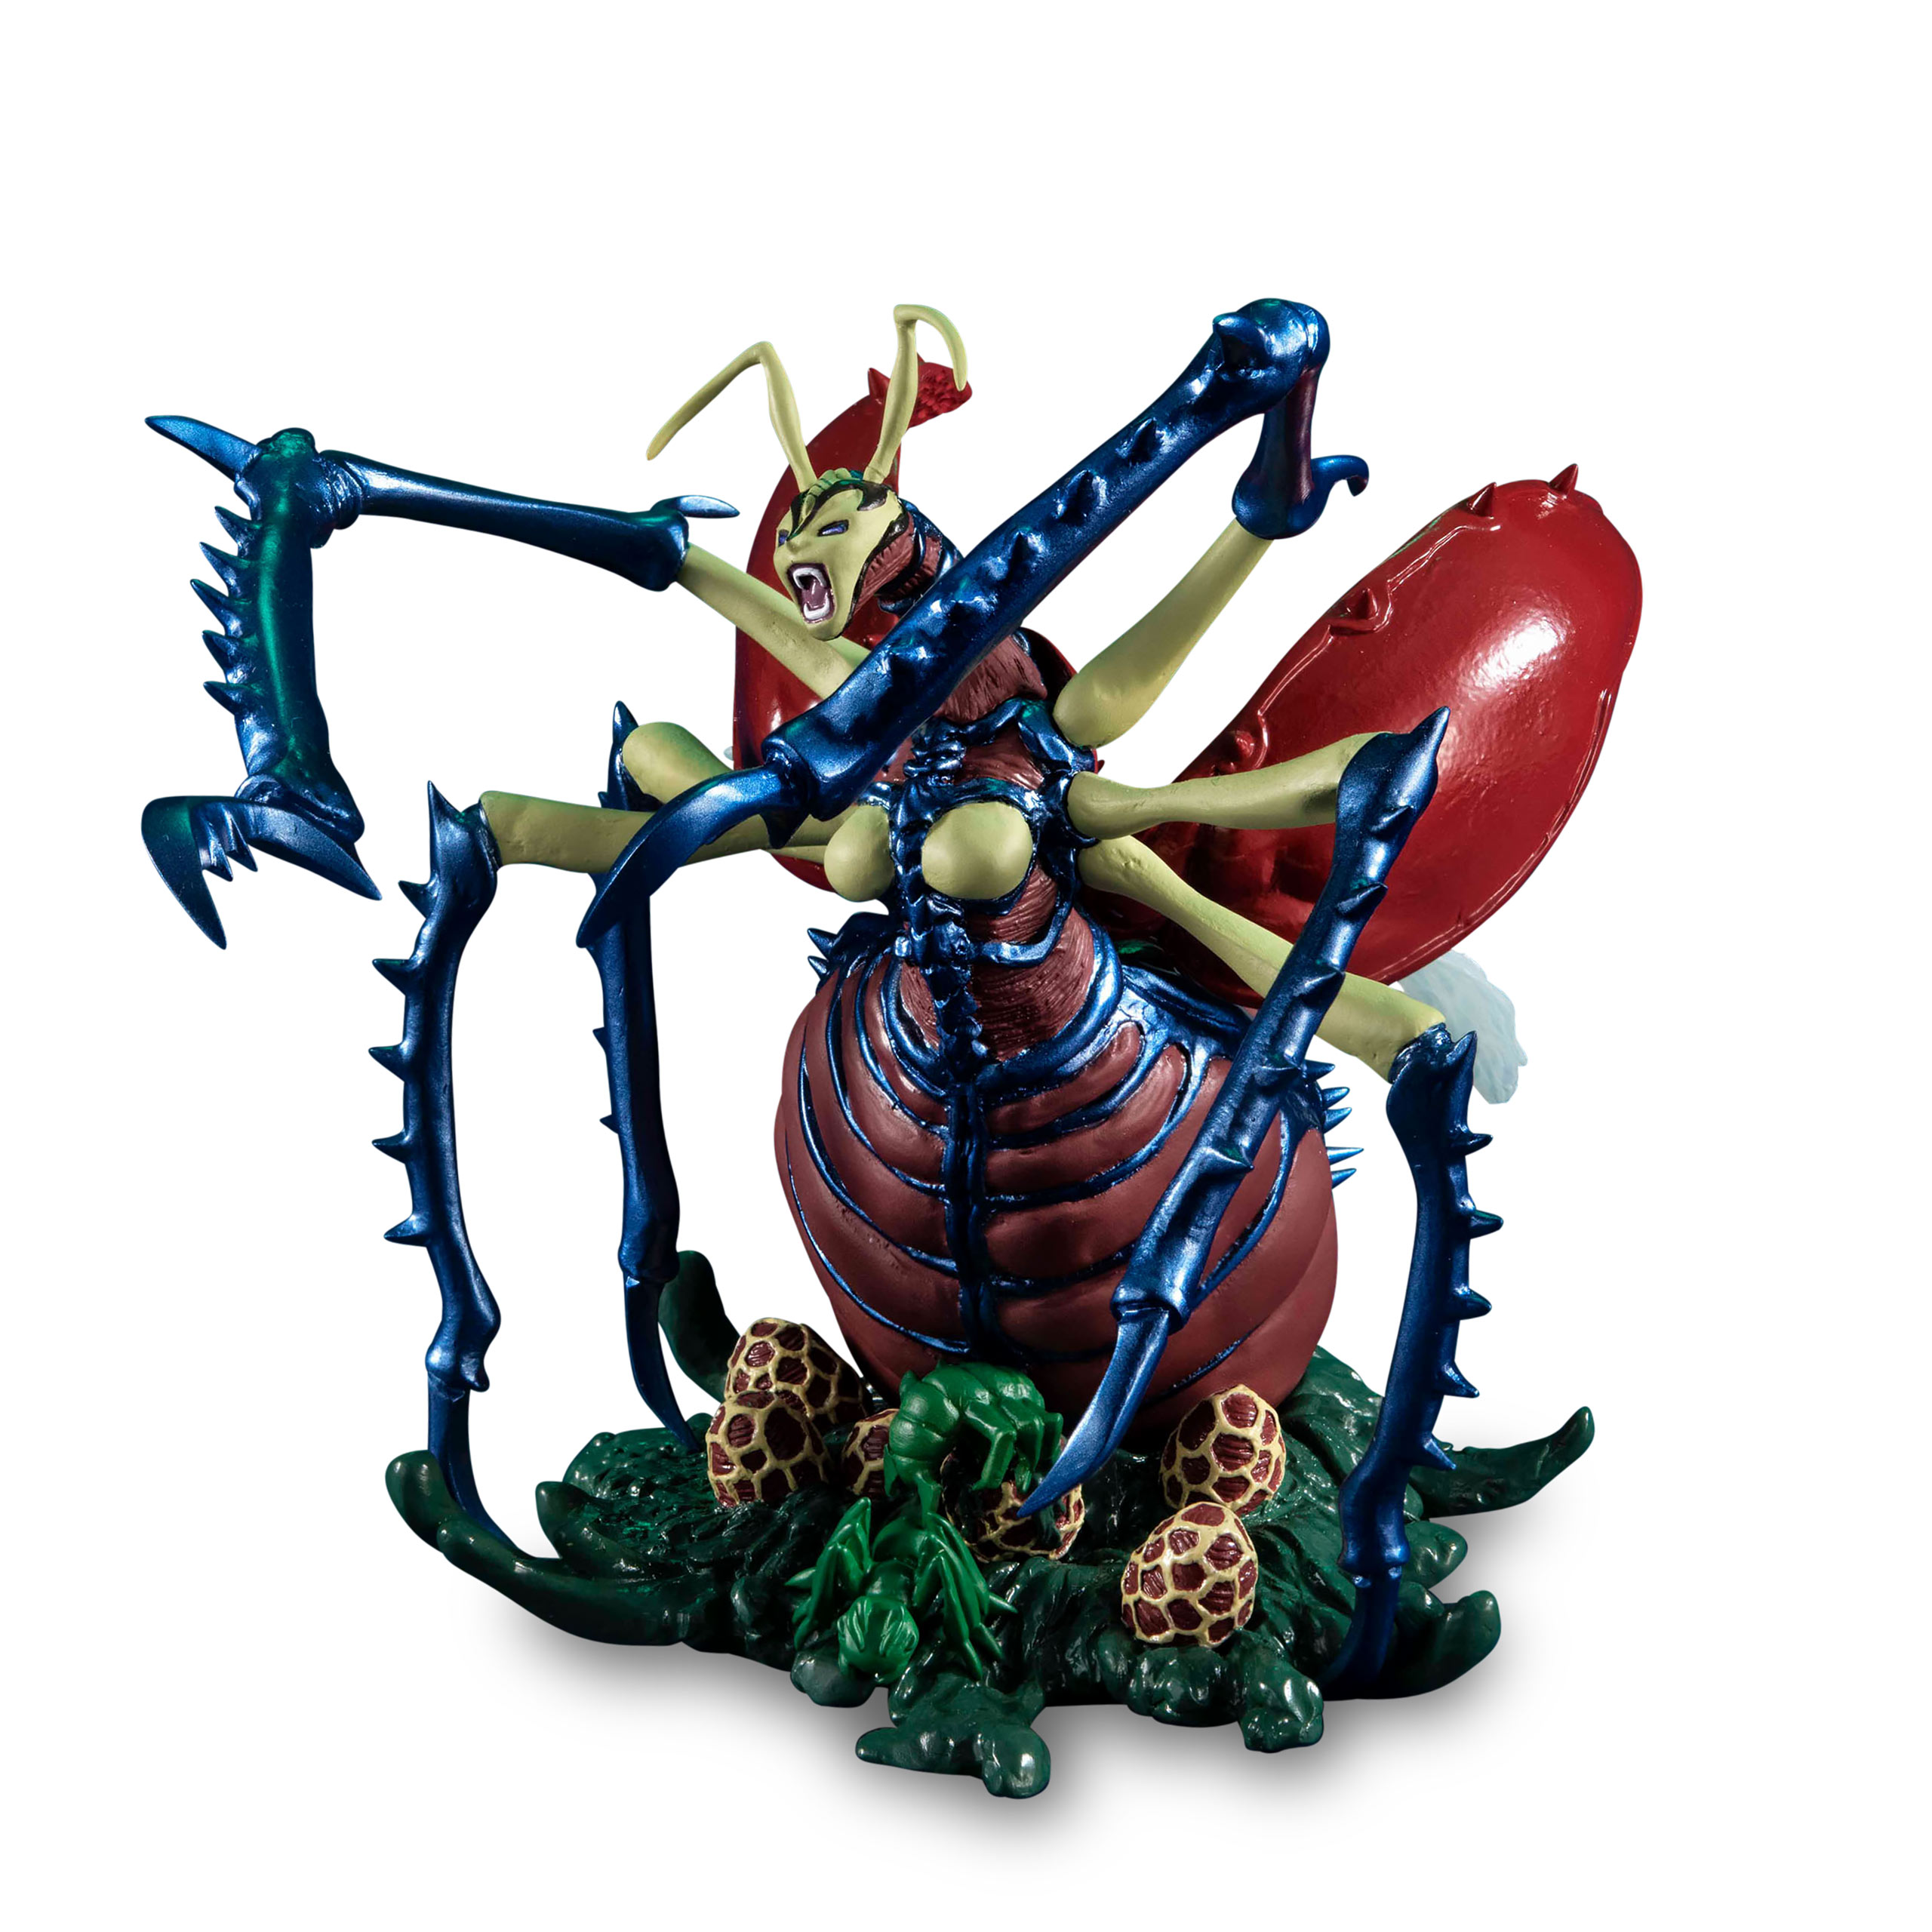 Yu-Gi-Oh! - Insect Queen Duel Monsters Statue